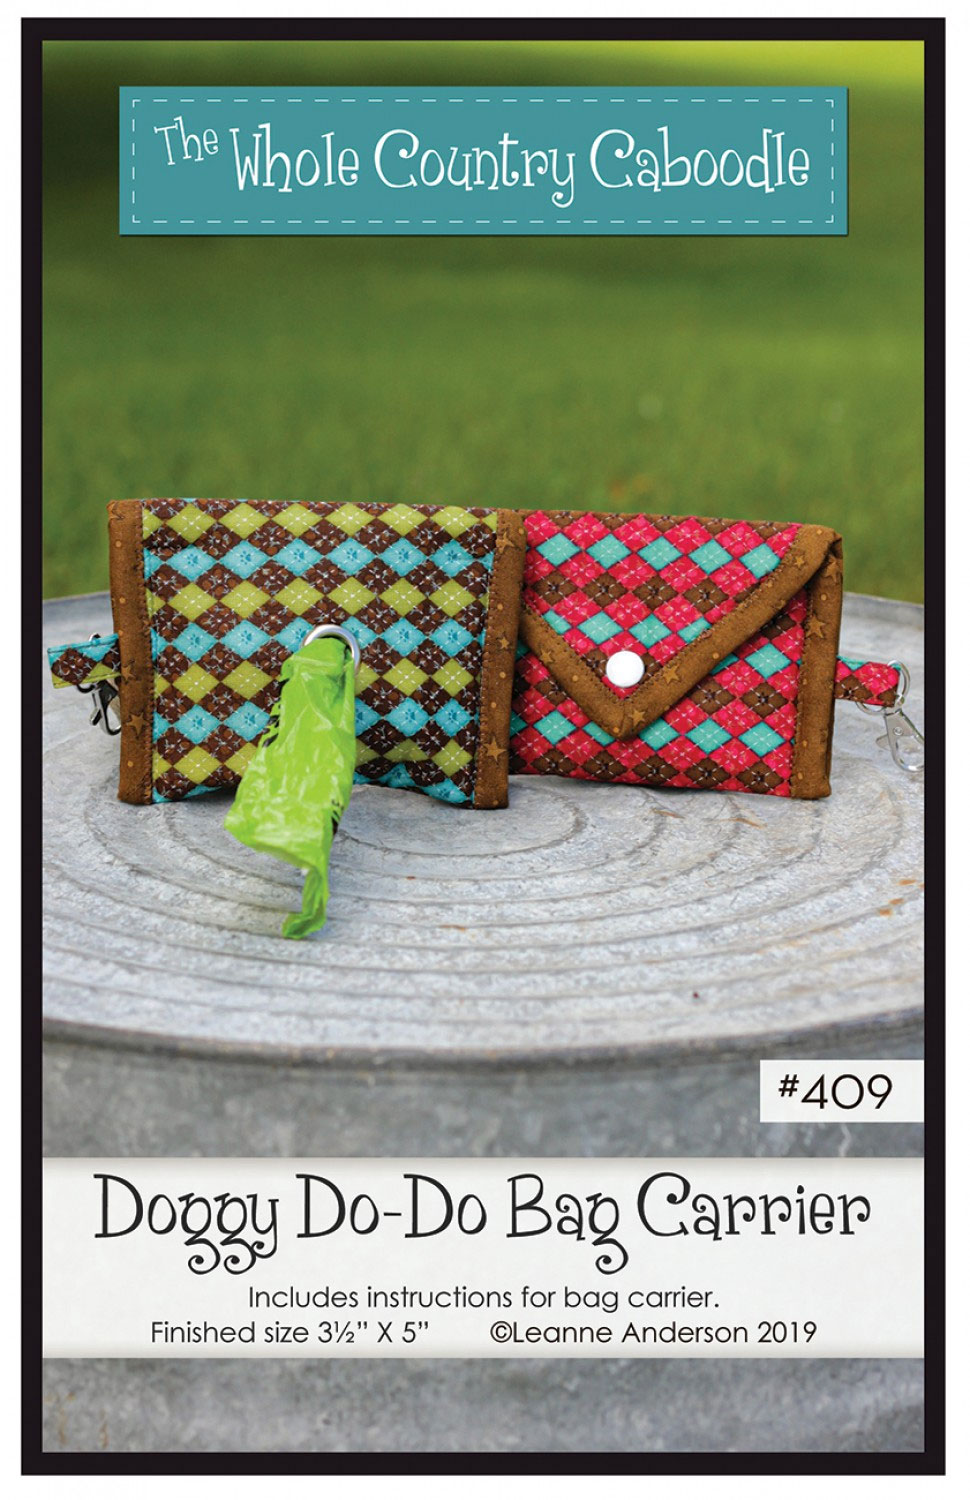 Doggy-do-do-bag-carrier-sewing-pattern-The-Whole-Country-Caboodle-front